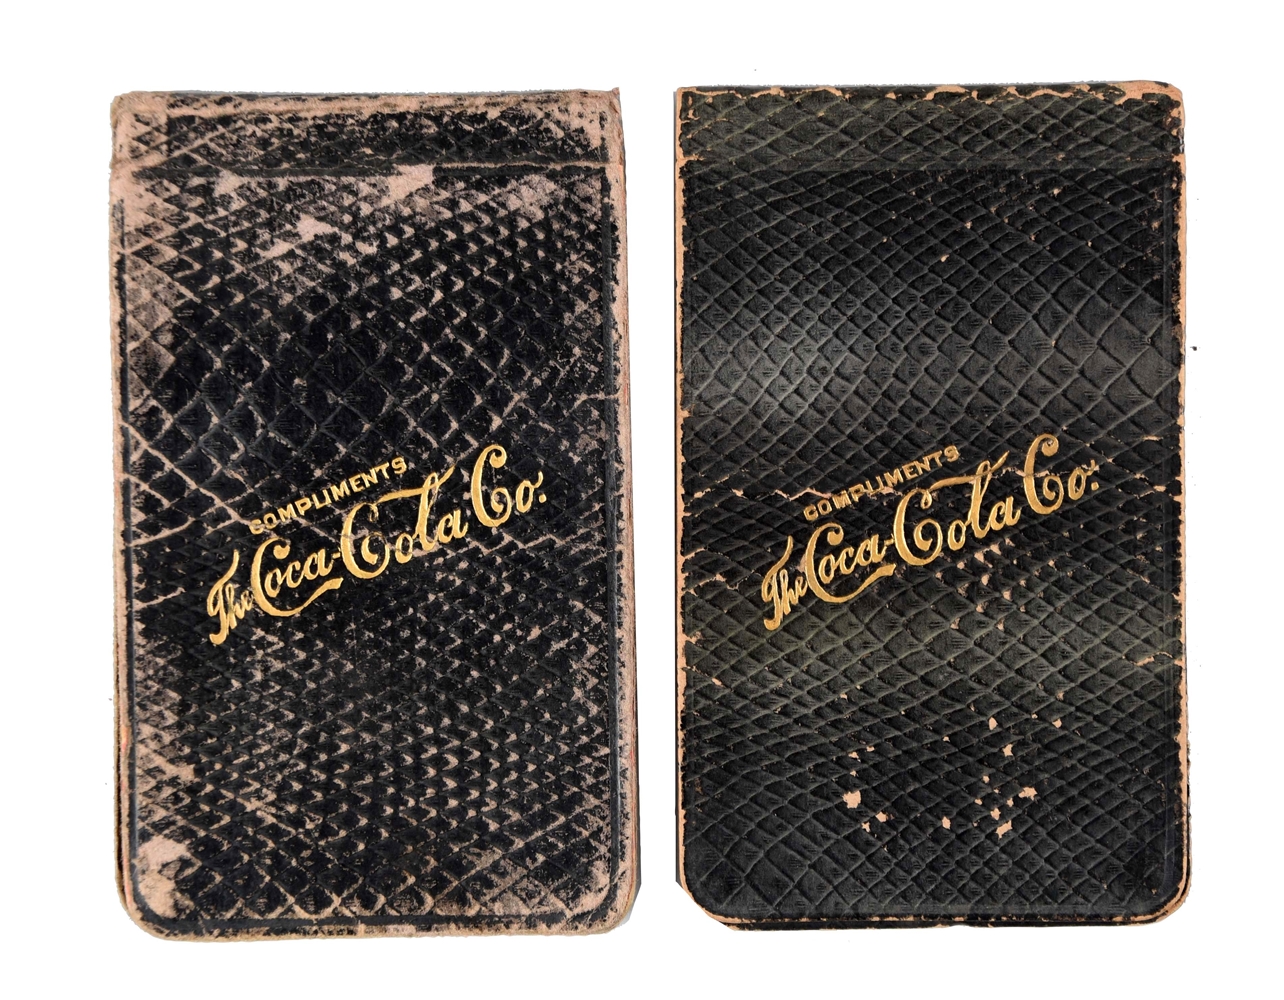 PAIR OF 1908 COCA - COLA NOTEPADS.